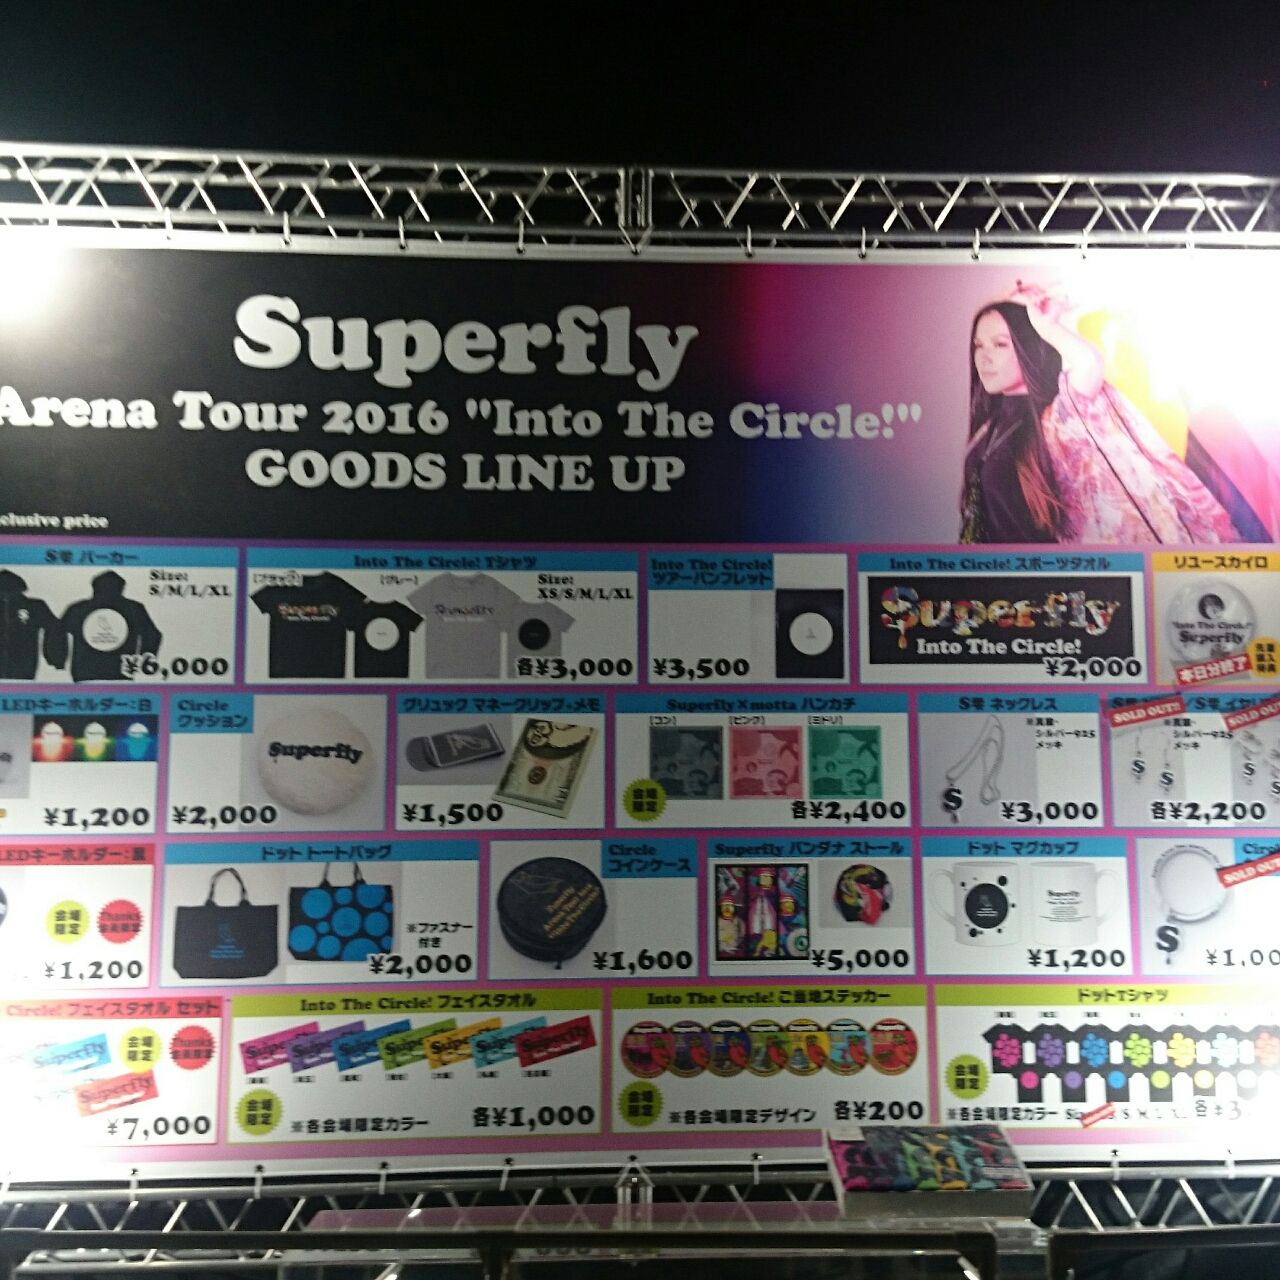 Superfly Arena Tour 2016 